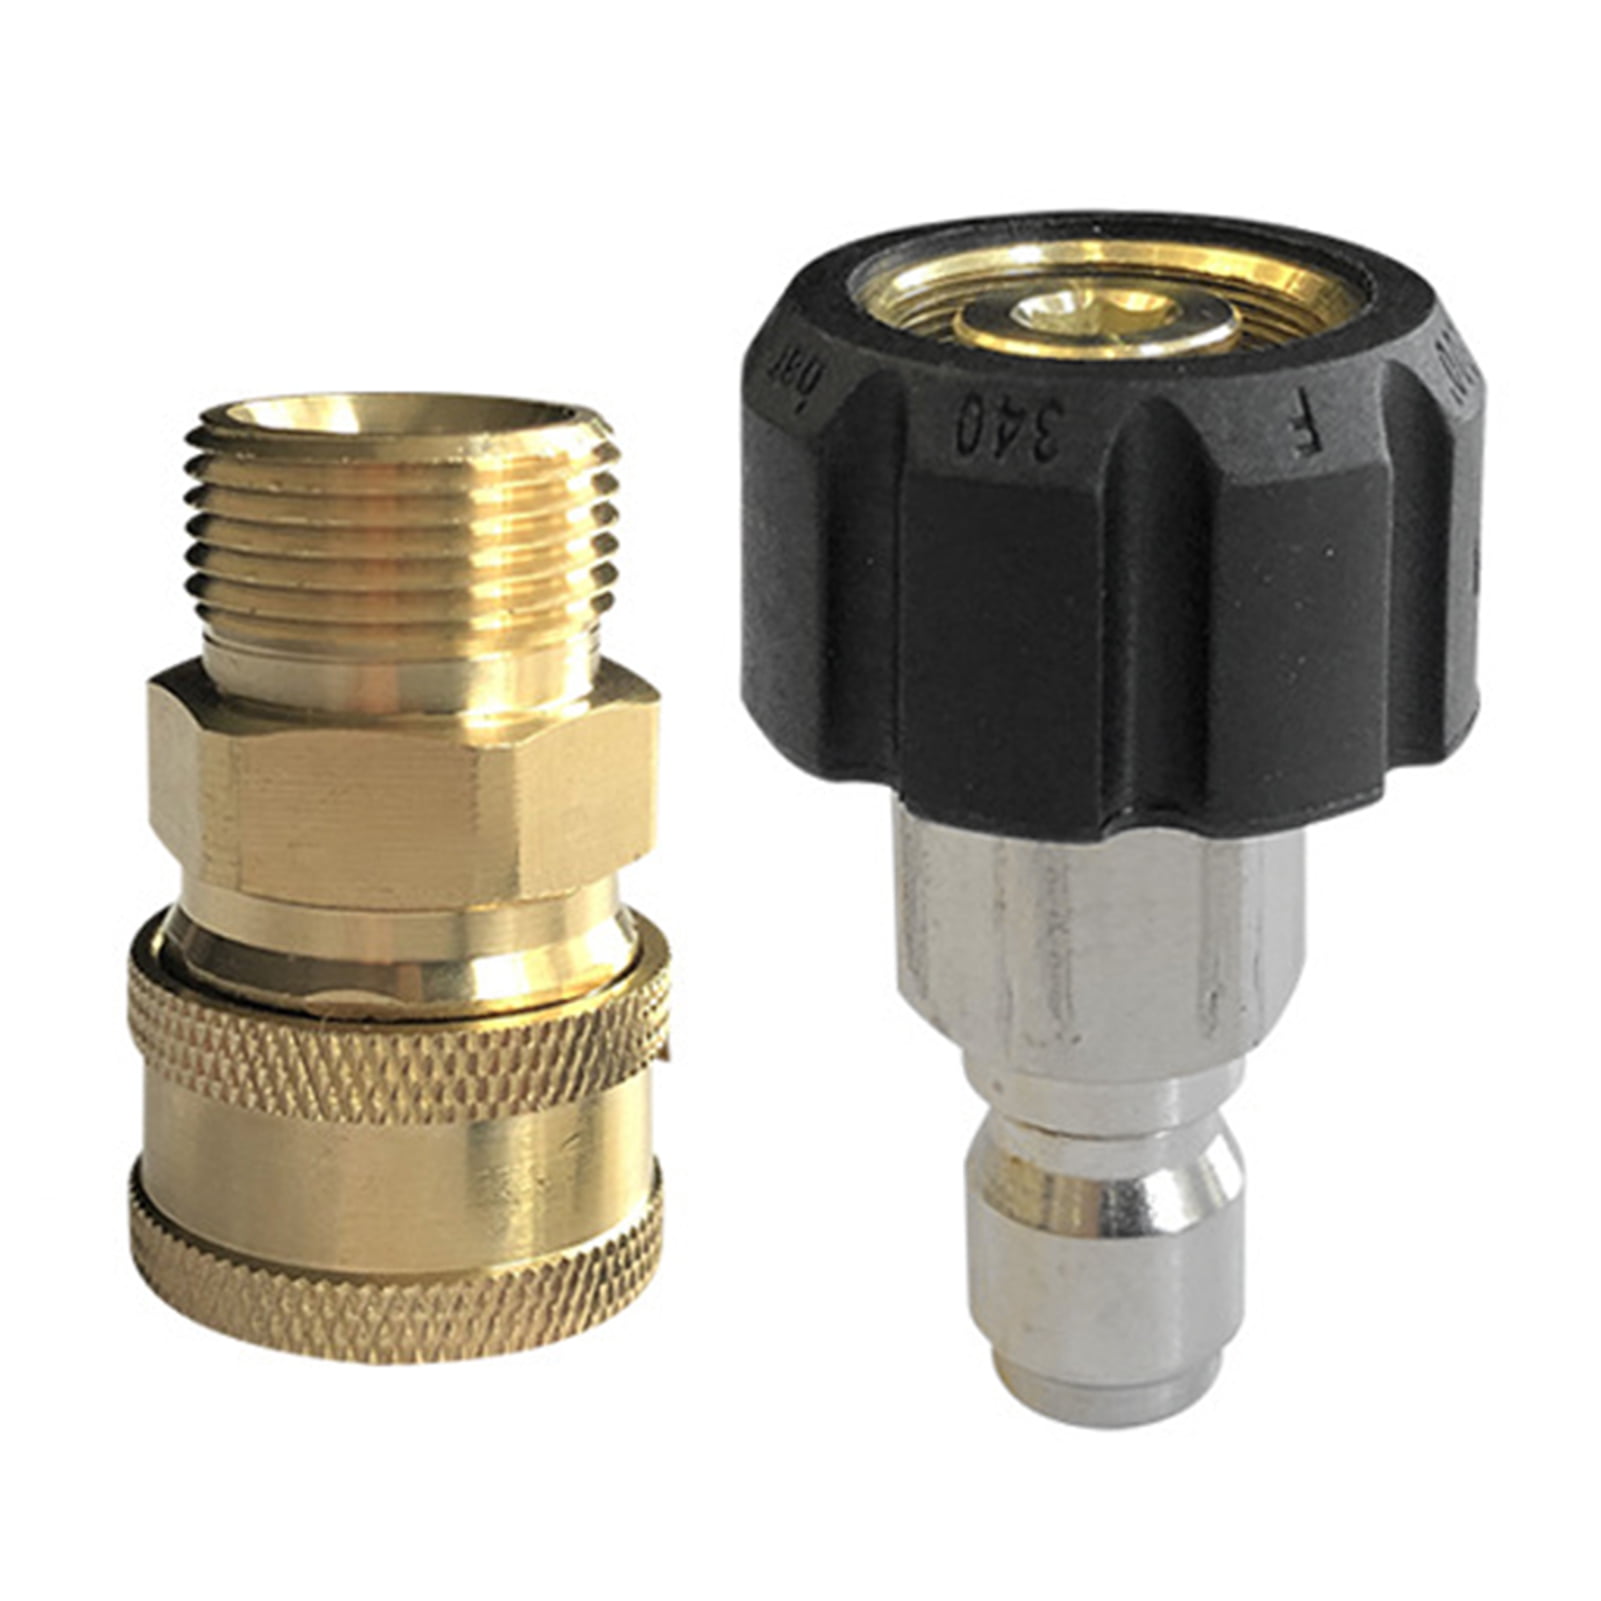 High Pressure Washer Adapter Set/ Quick Connect Gun To Wand,M22 To 1/4 Fitting